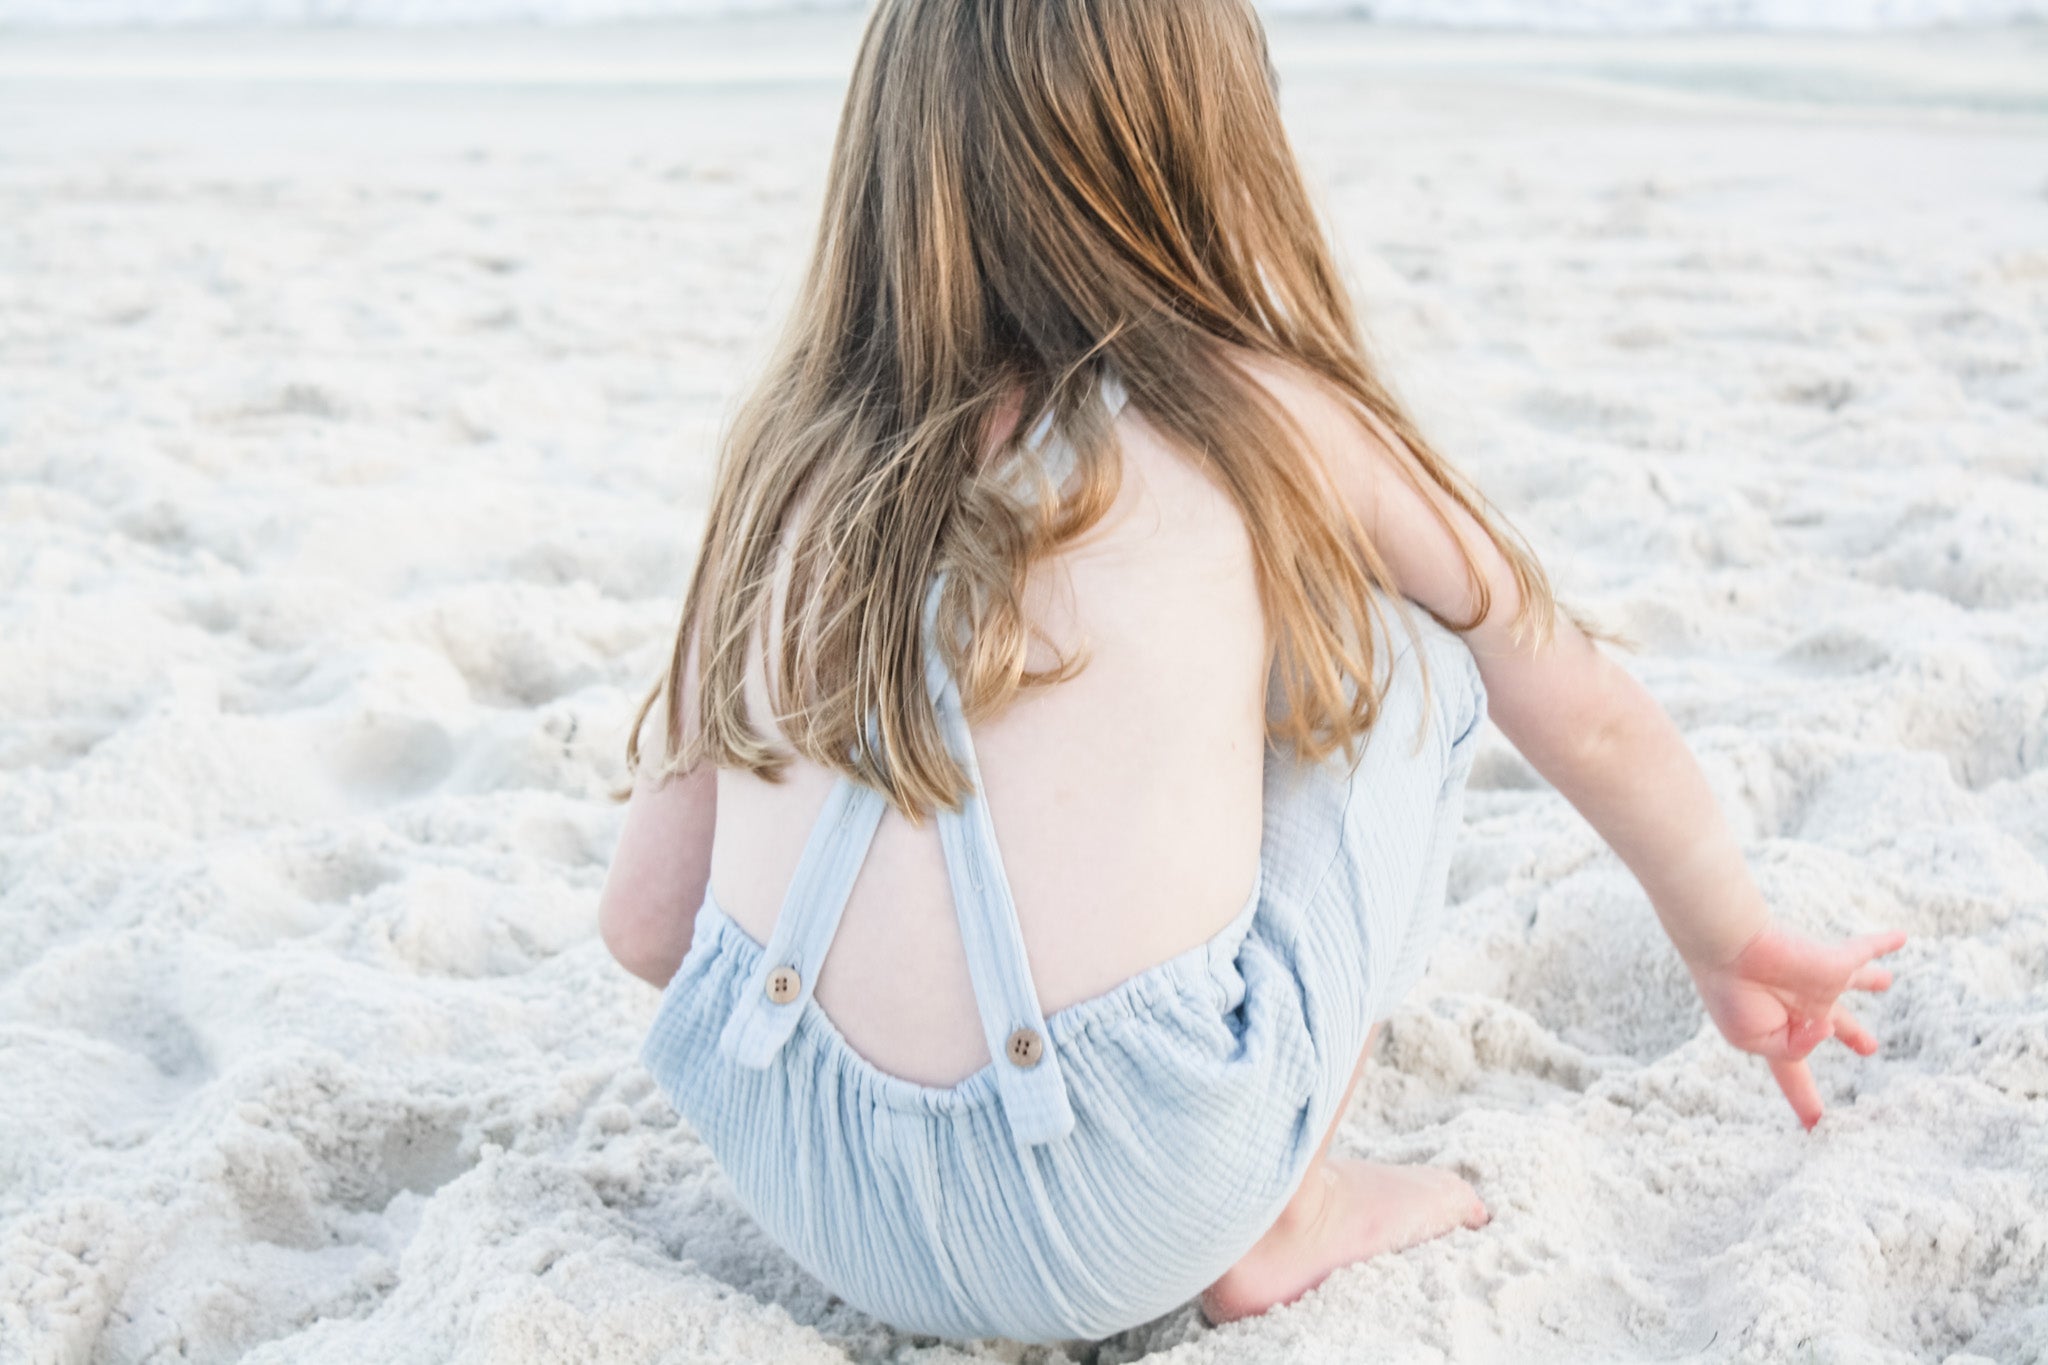 Playing in the sand while wearing our Super soft double gauze overalls in Seafoam.